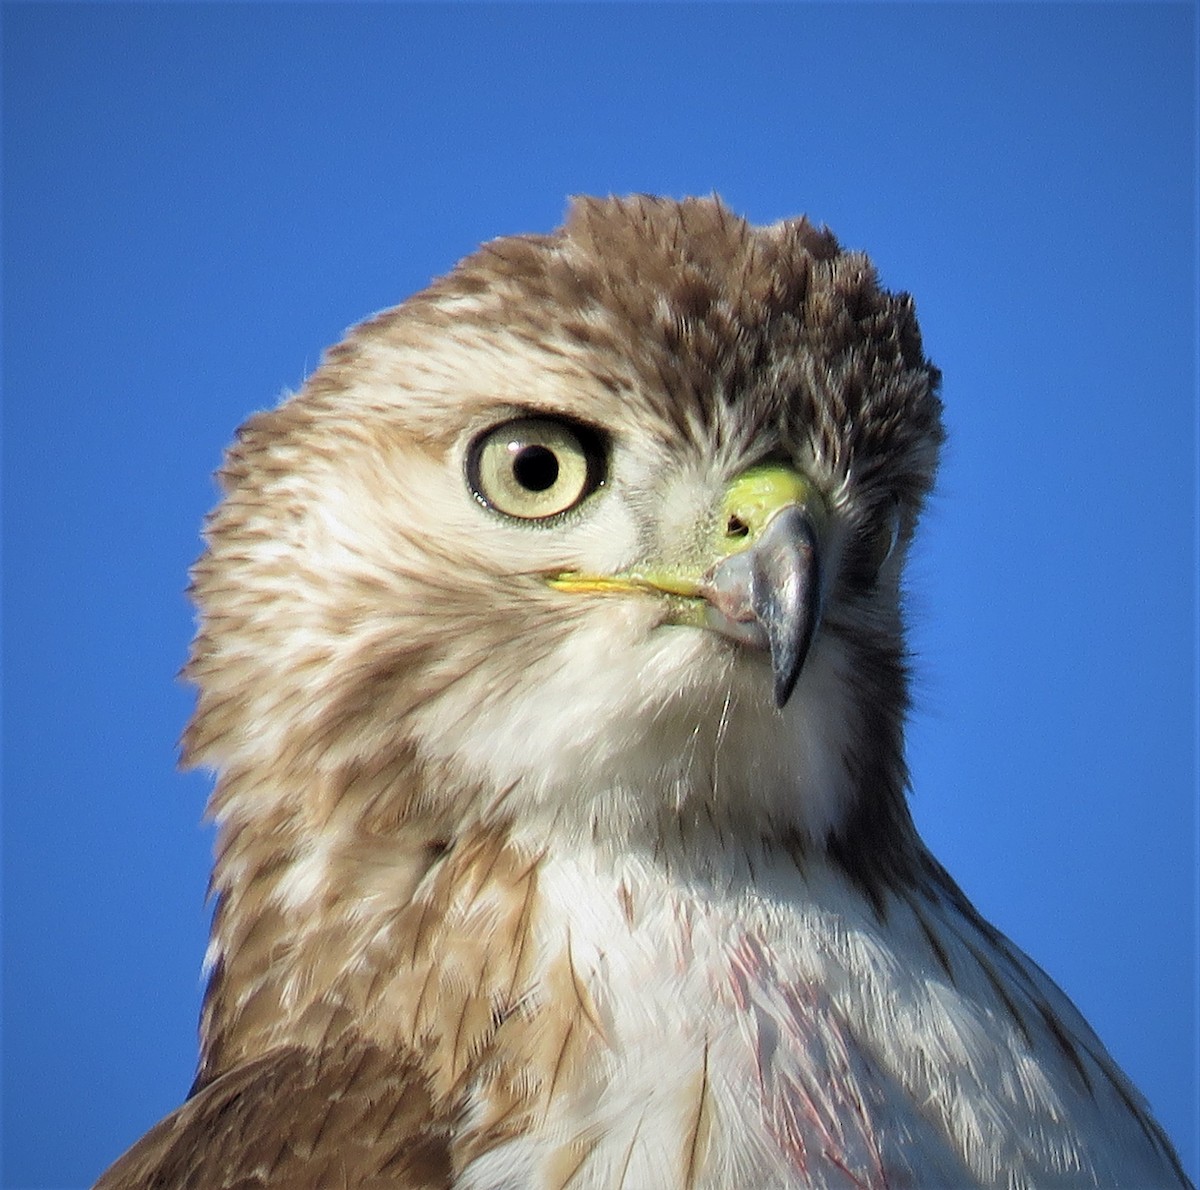 Red-tailed Hawk - judy parrot-willis